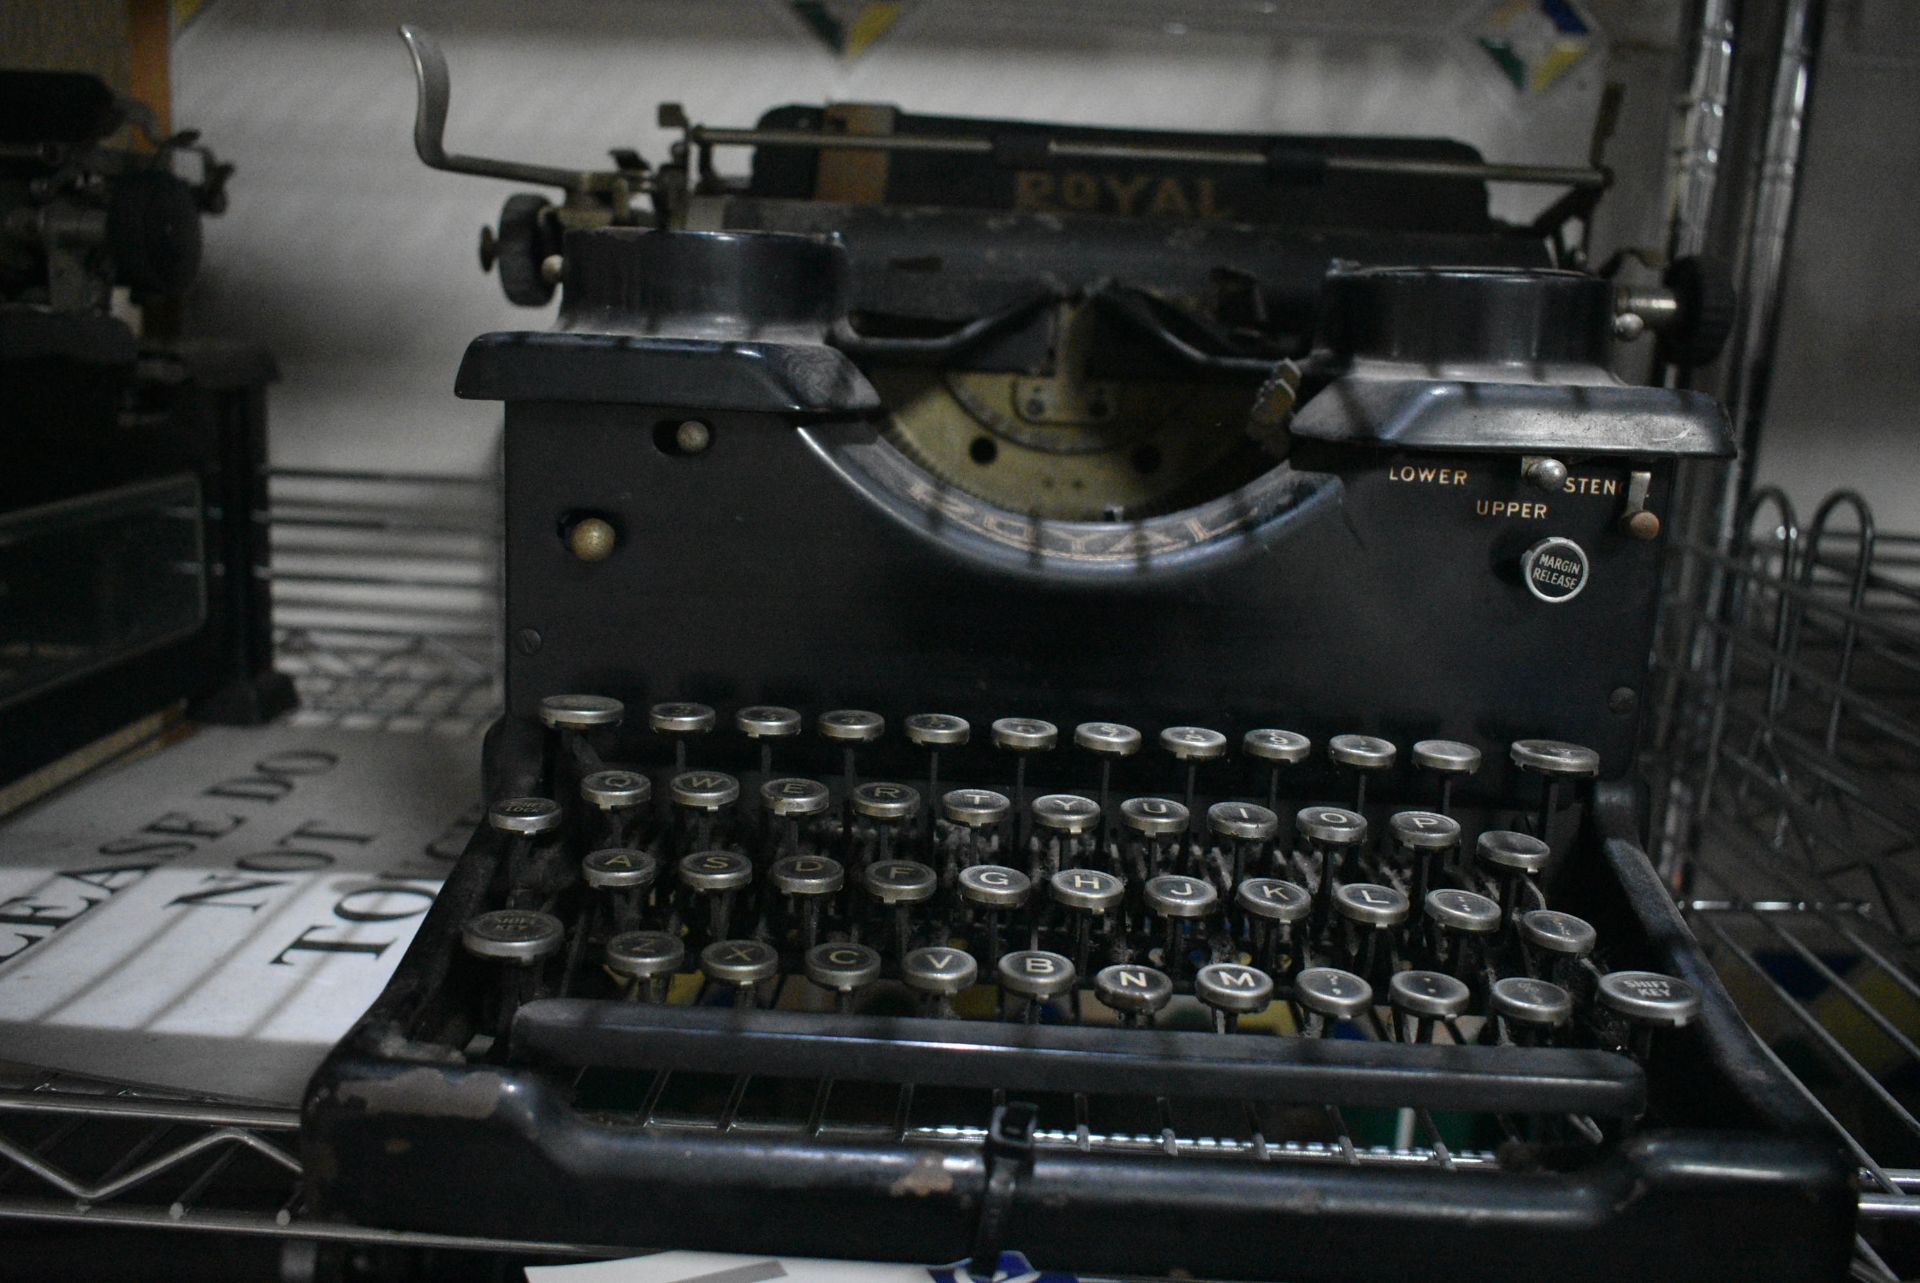 Royal Typewriter (note this lot is not subject to - Image 3 of 4